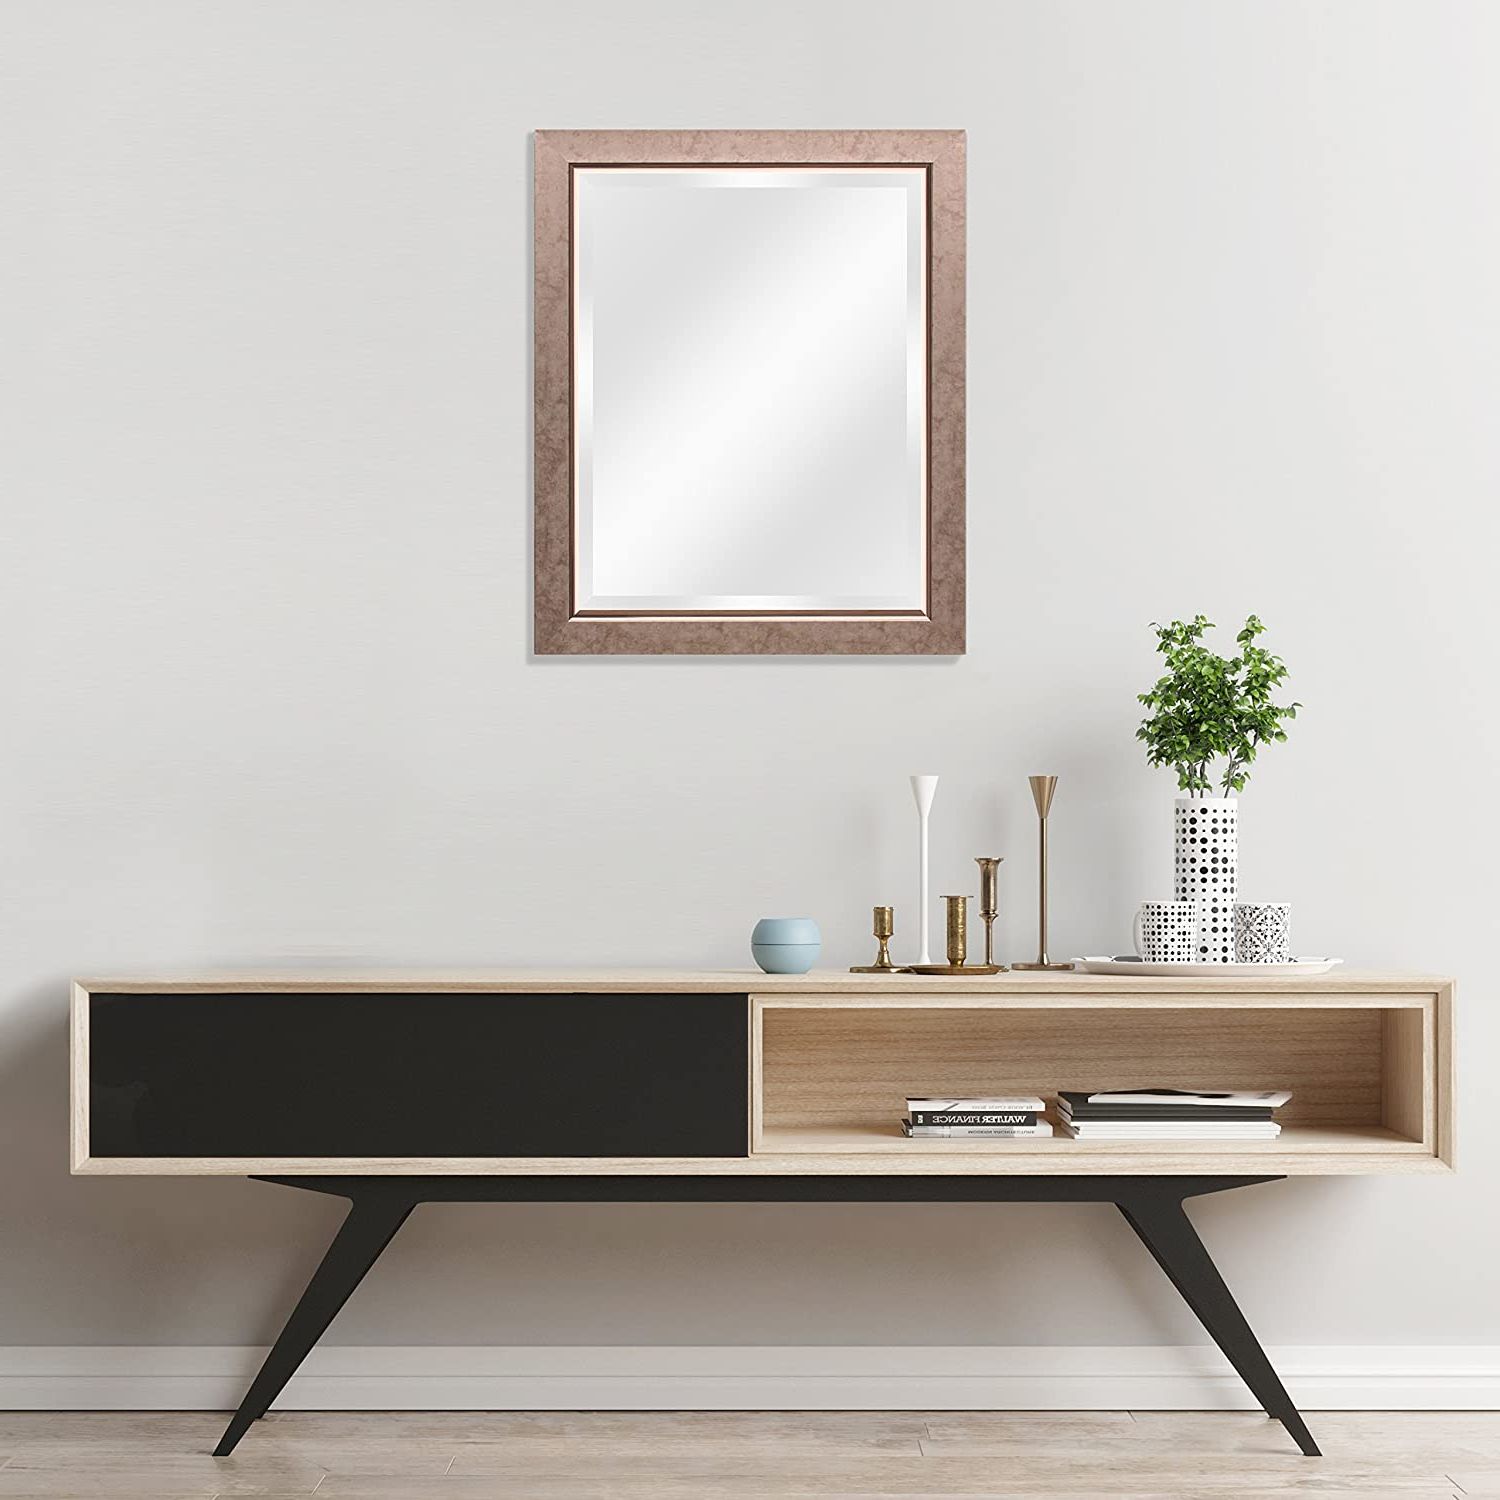 Fashionable Copper Bronze Wall Mirrors With Beveled Copper Bronze Ecohome Wall Mirror Framed 27x33 Rectangular (View 13 of 15)